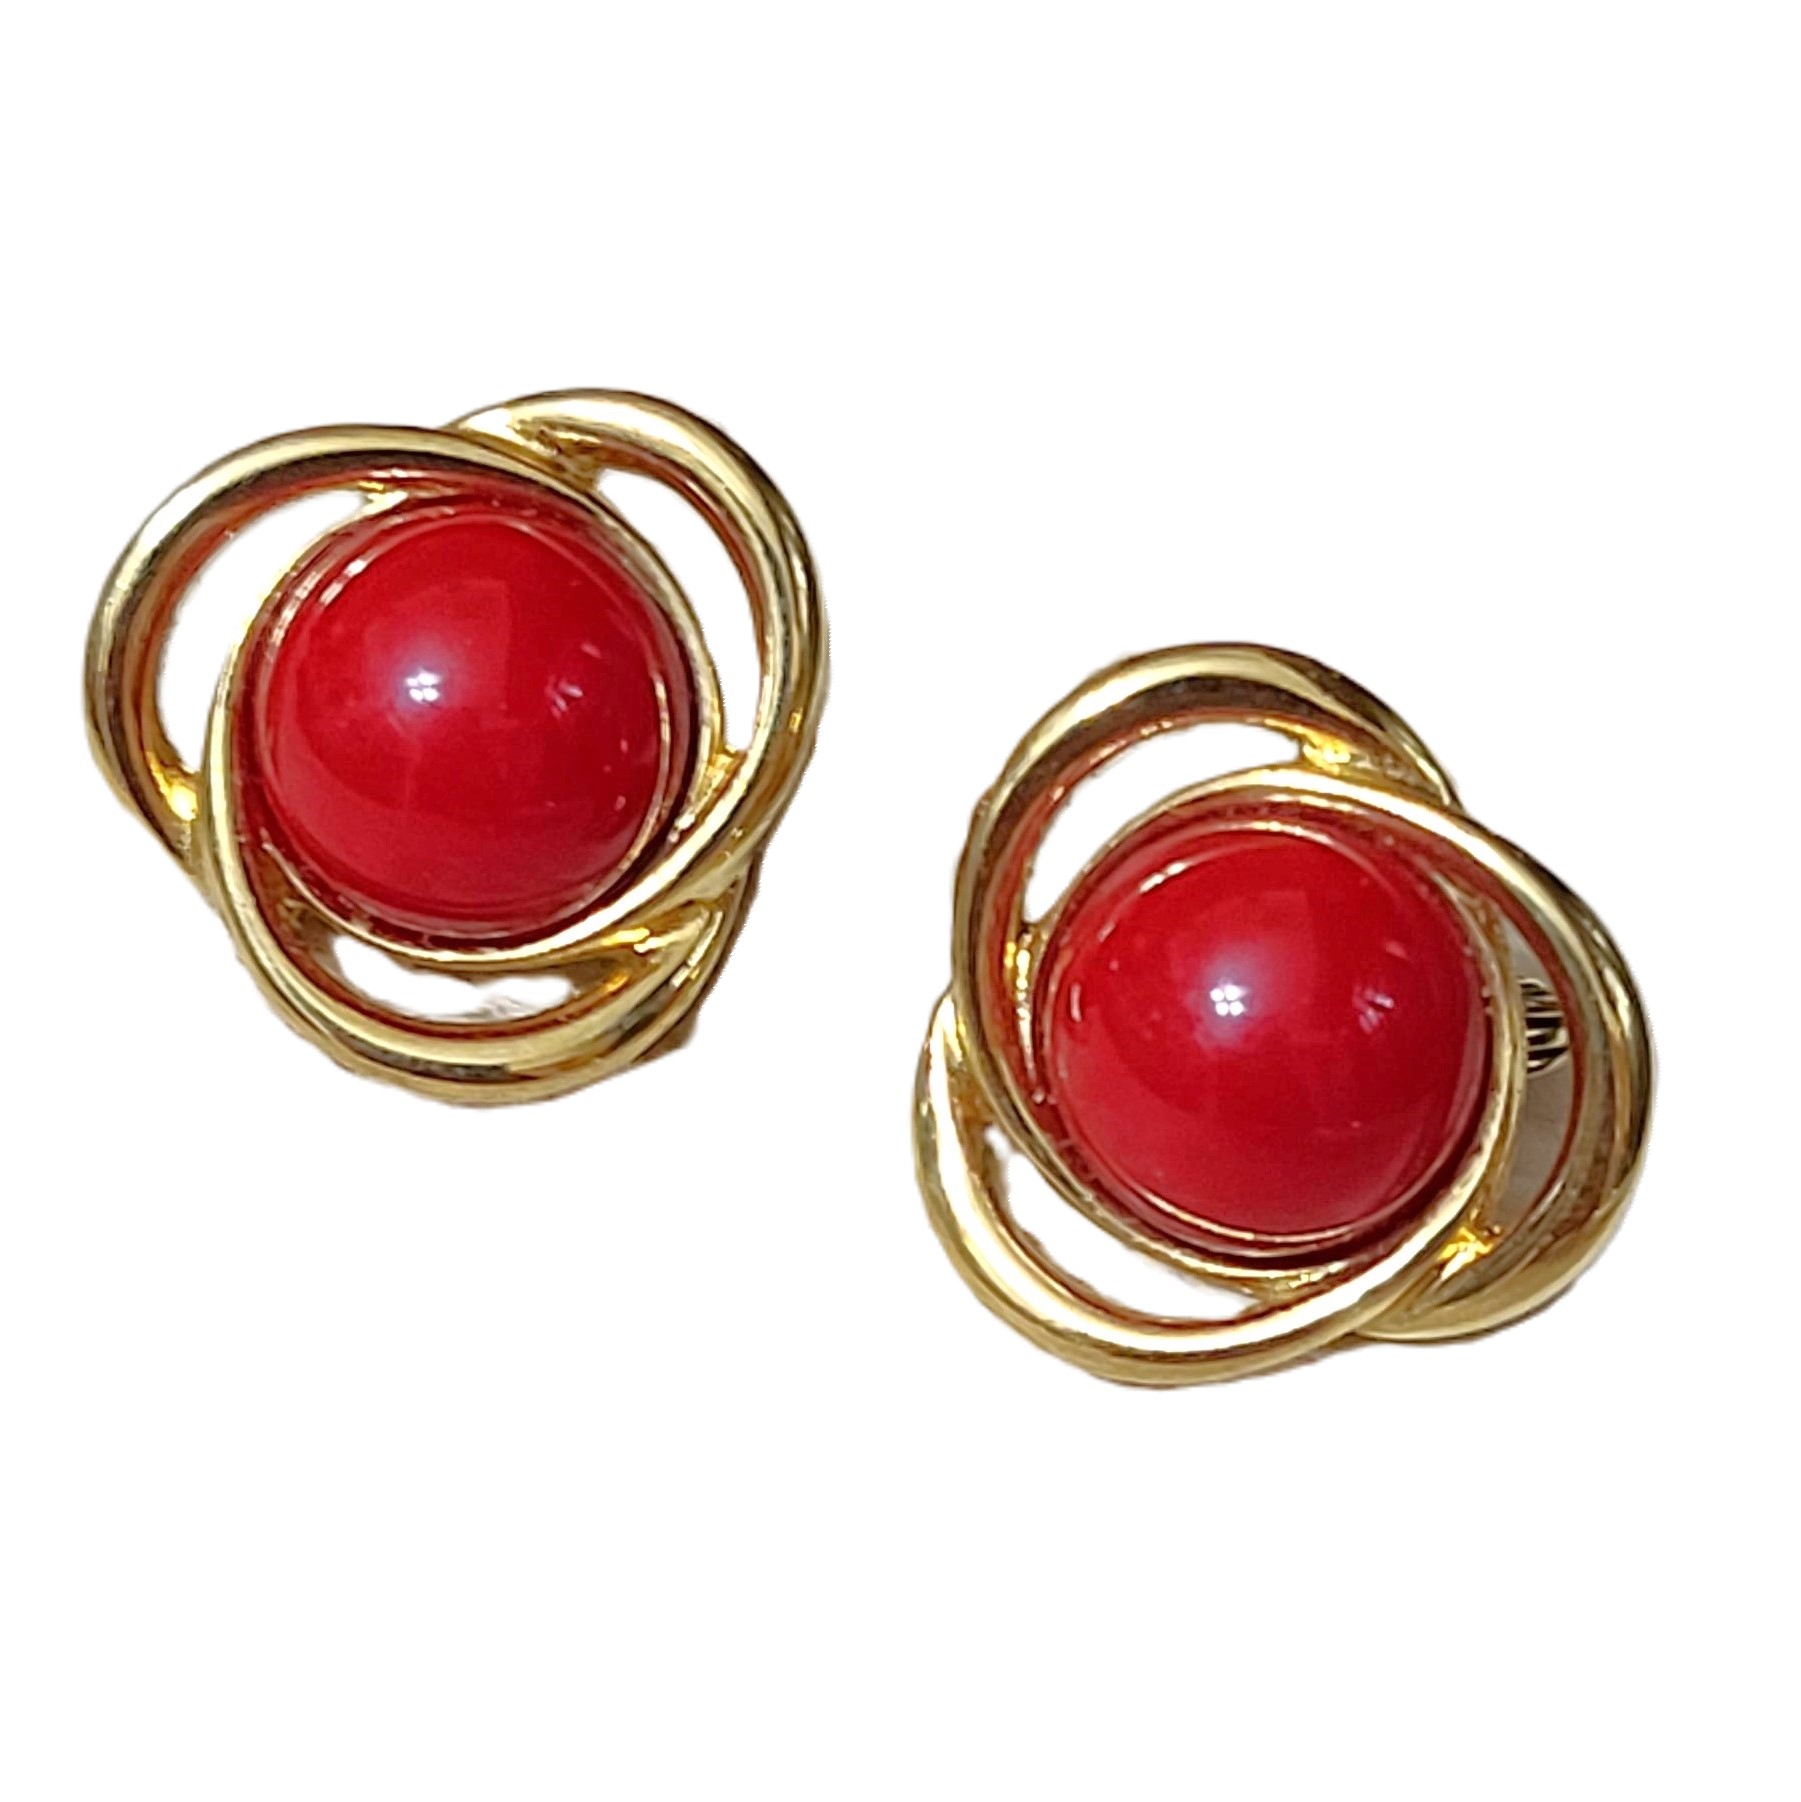 Monet clip on earrings, red cabachon center signed designer Monet - Click Image to Close